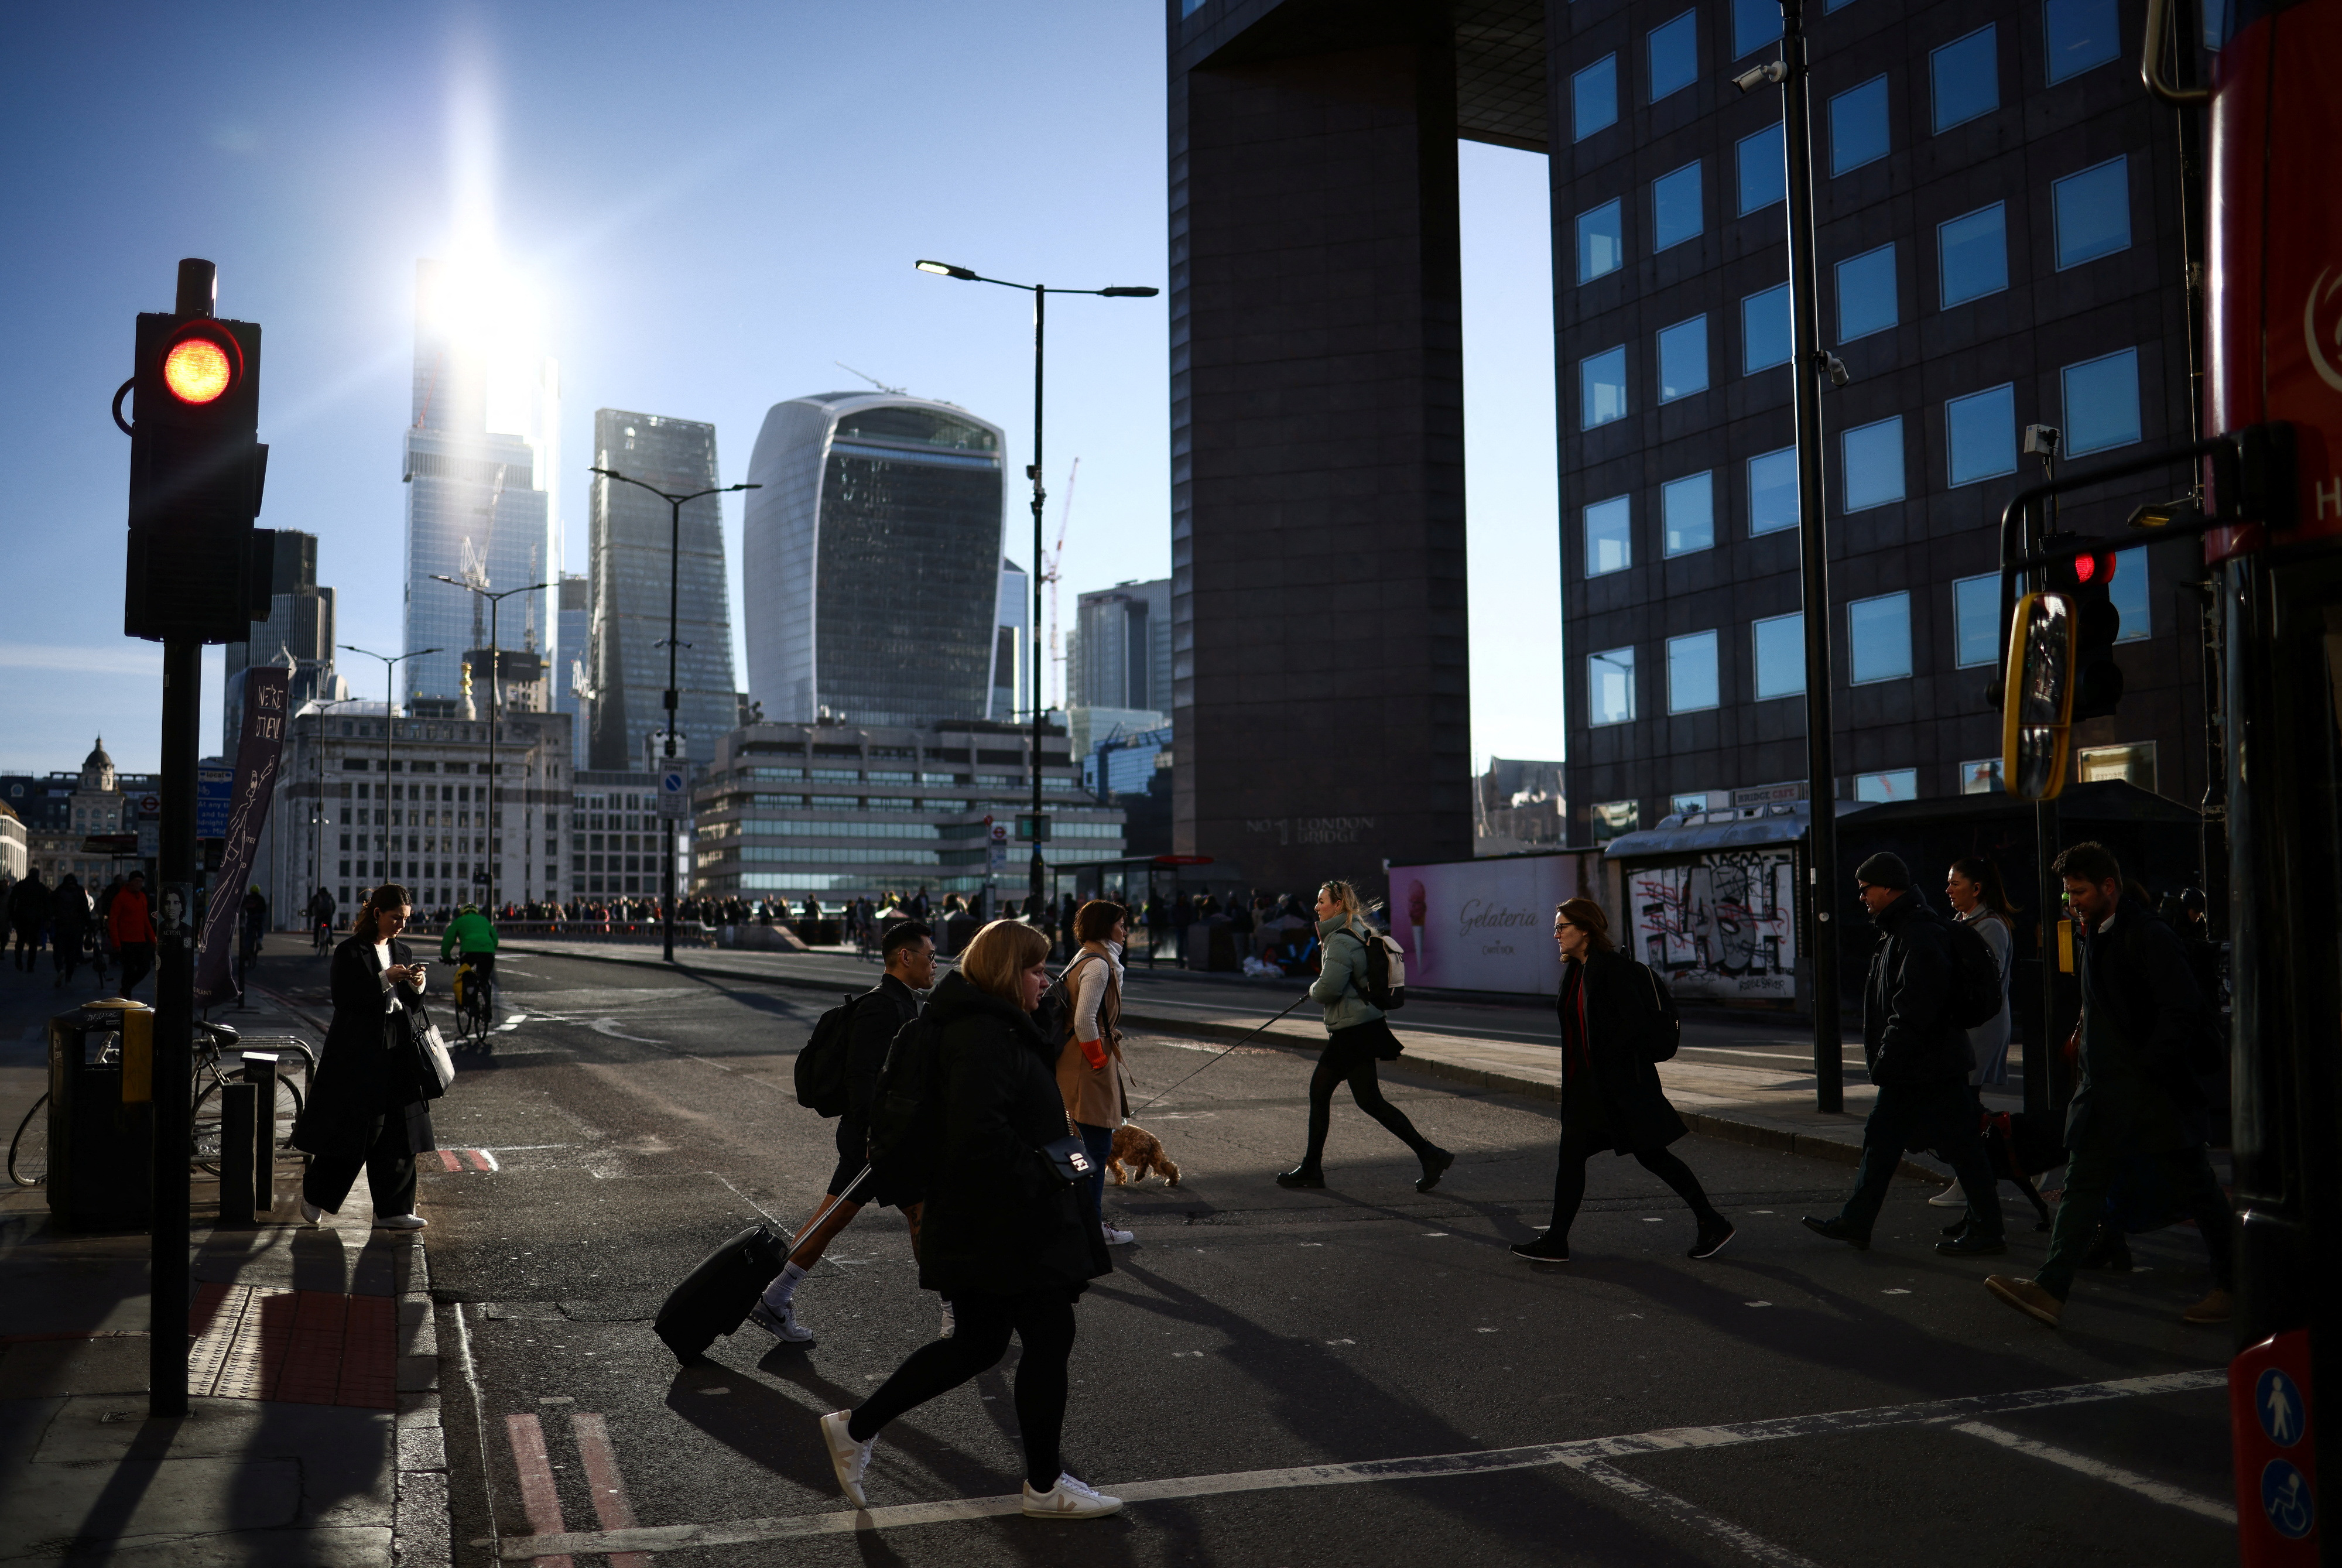 People cross the road on London Bridge during the morning rush hour